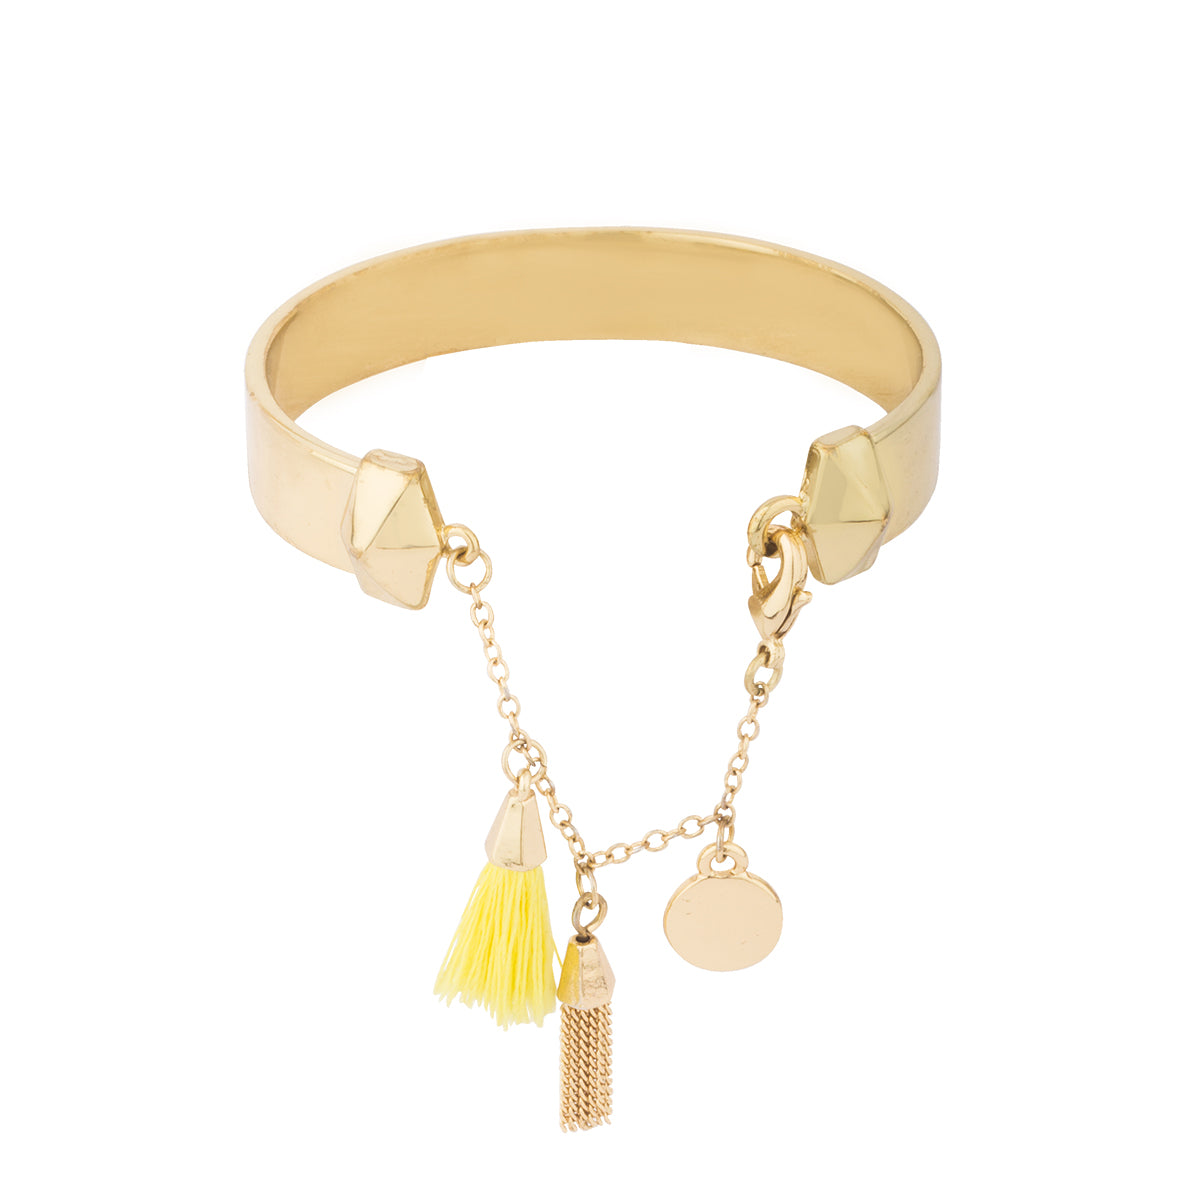 Simple and Subtle - This braclet is gold plated with chains hanging to make it look stunning.